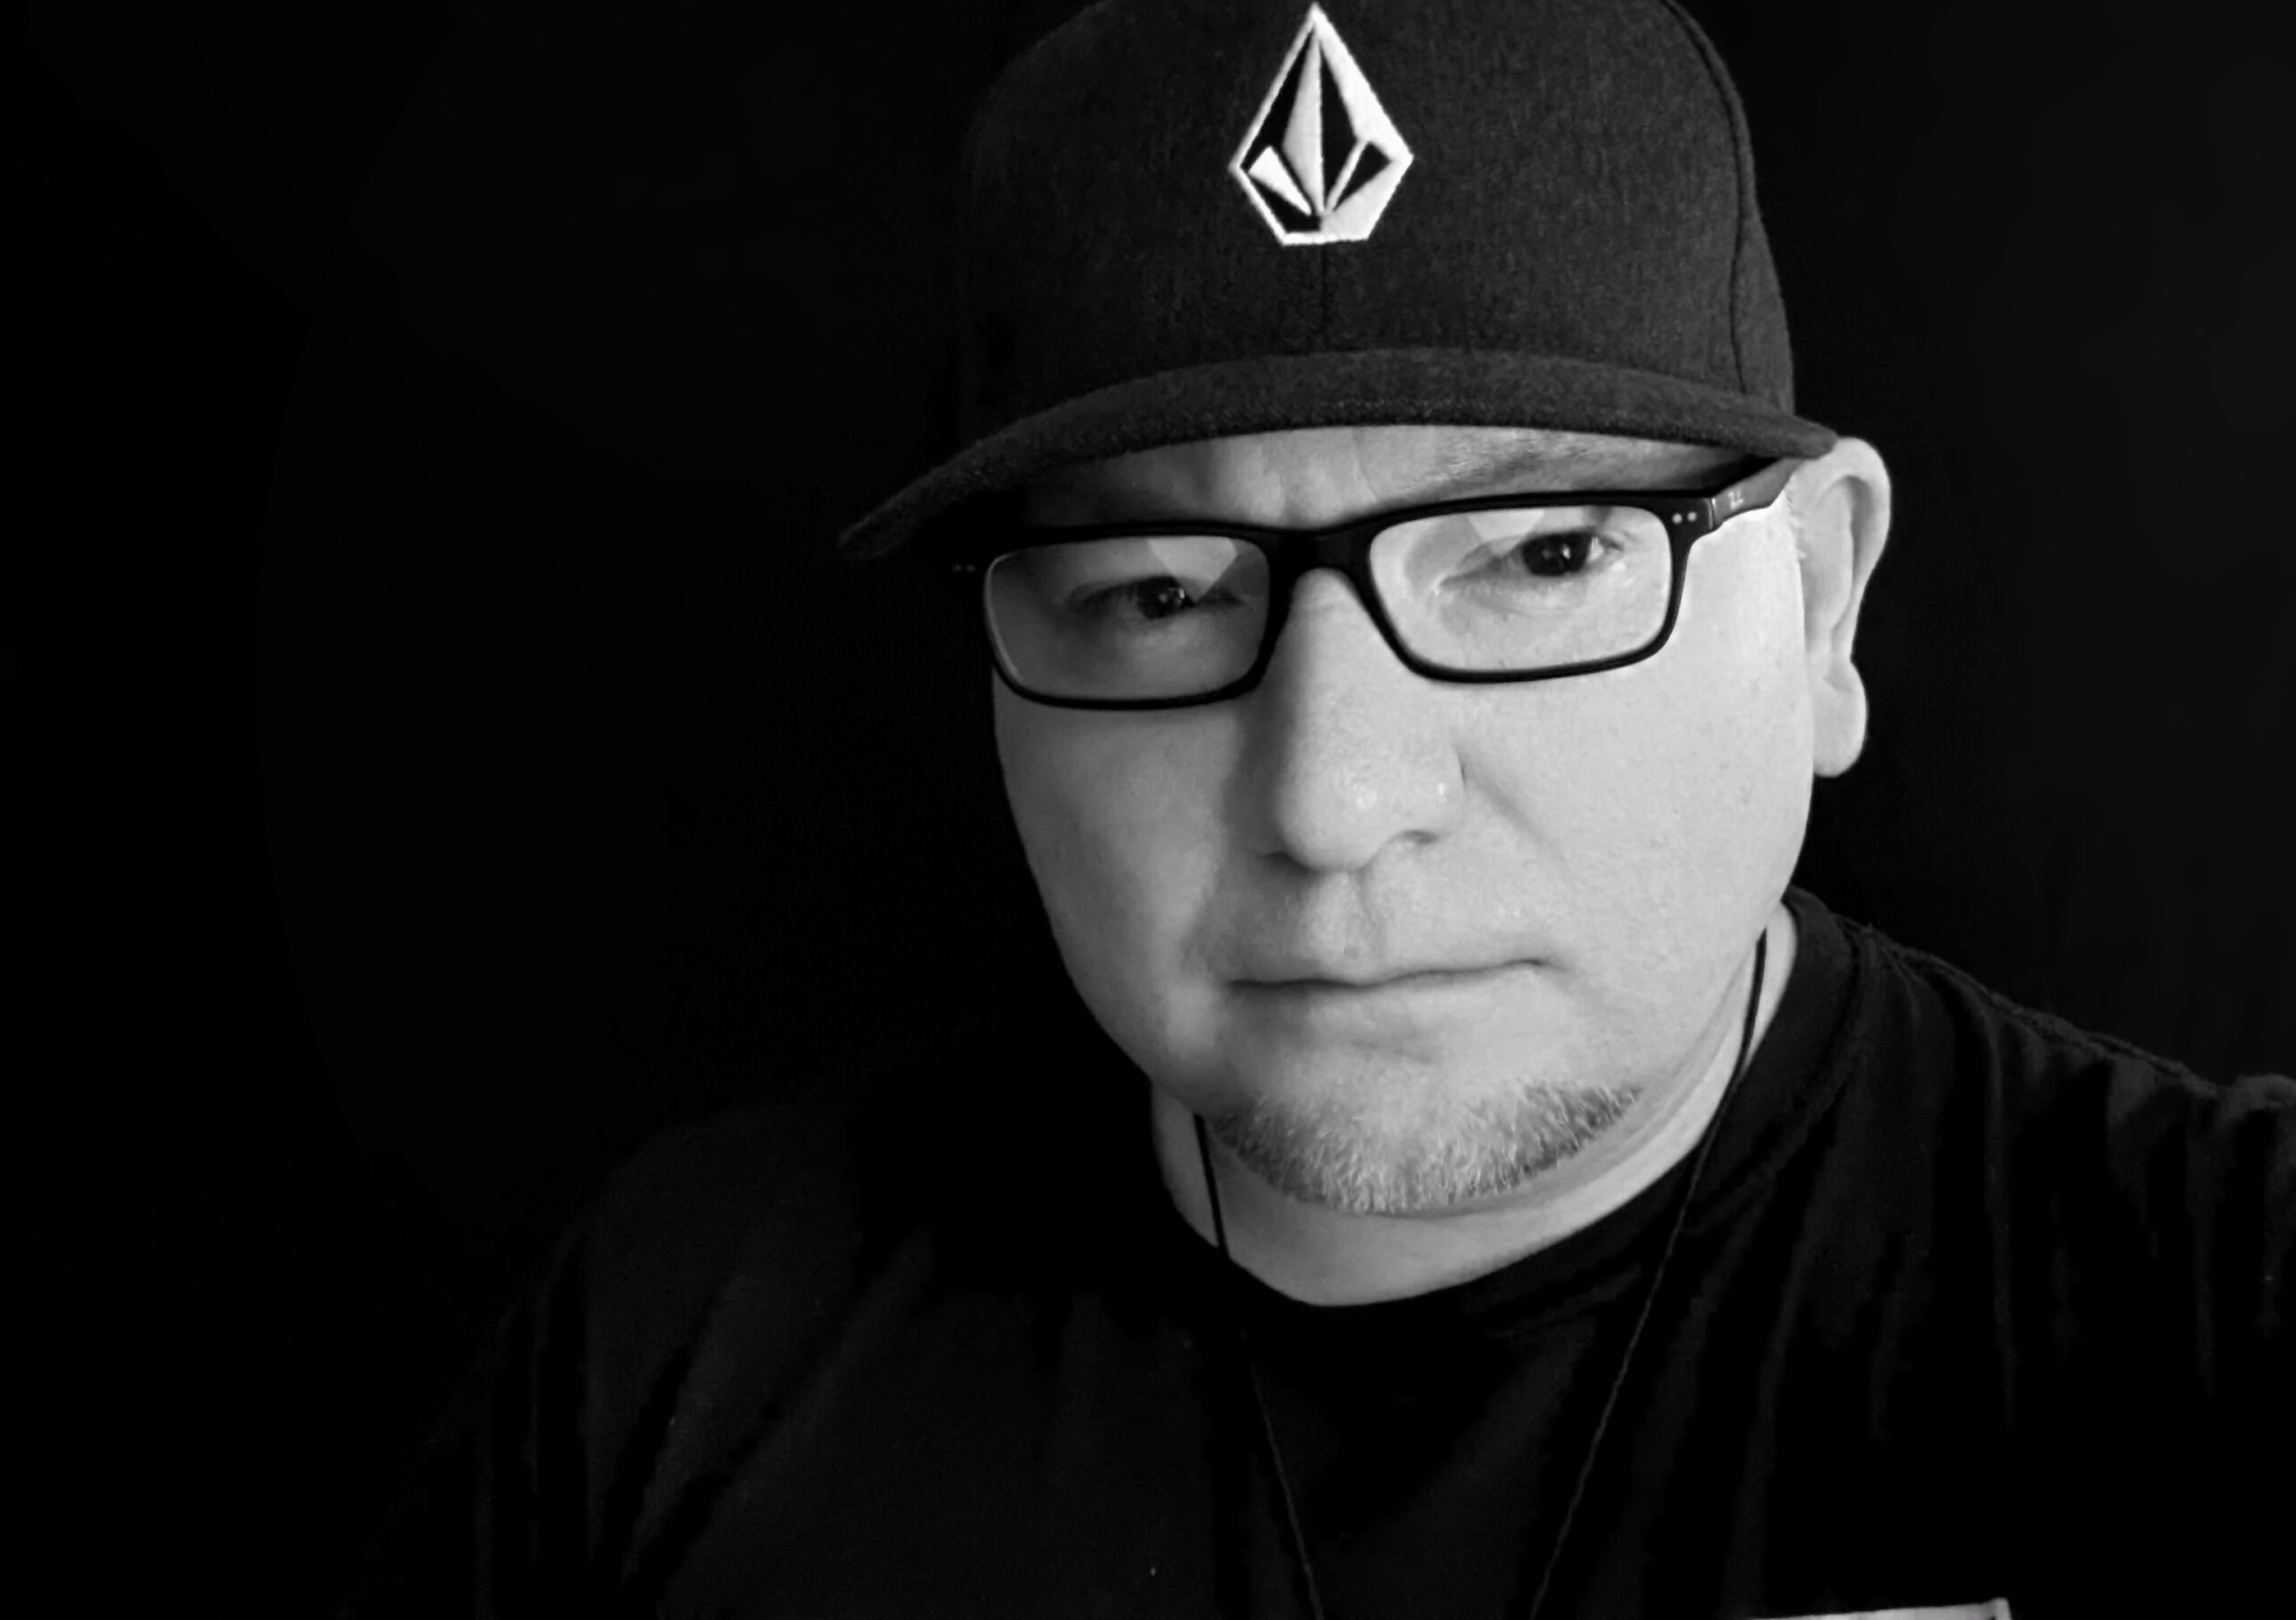 black and white photo of man with glasses and hat on